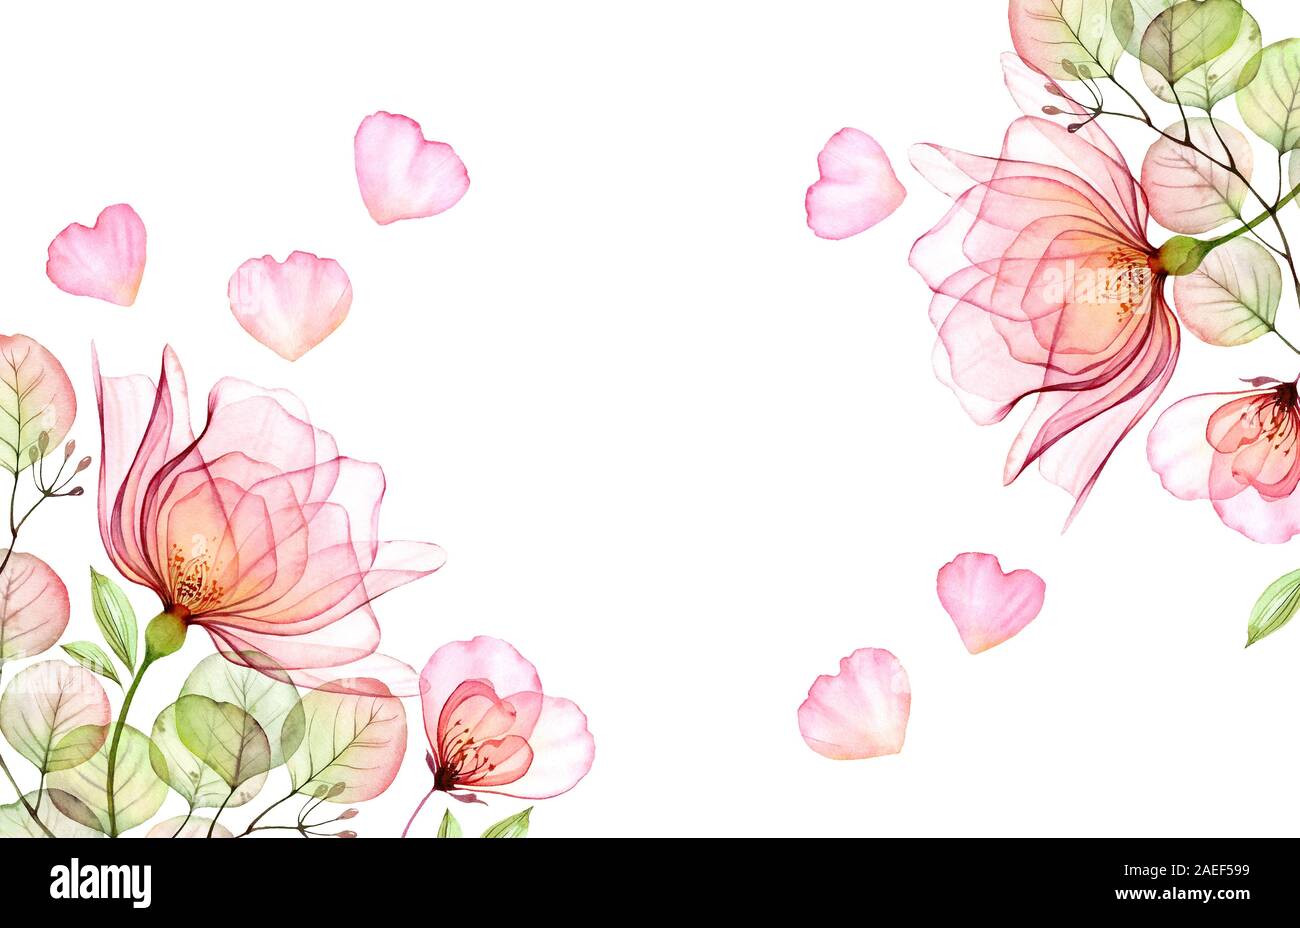 Watercolor floral background with rose garden and place for text. Transparent flowers with flying petals isolated in white. Botanical floral Stock Photo